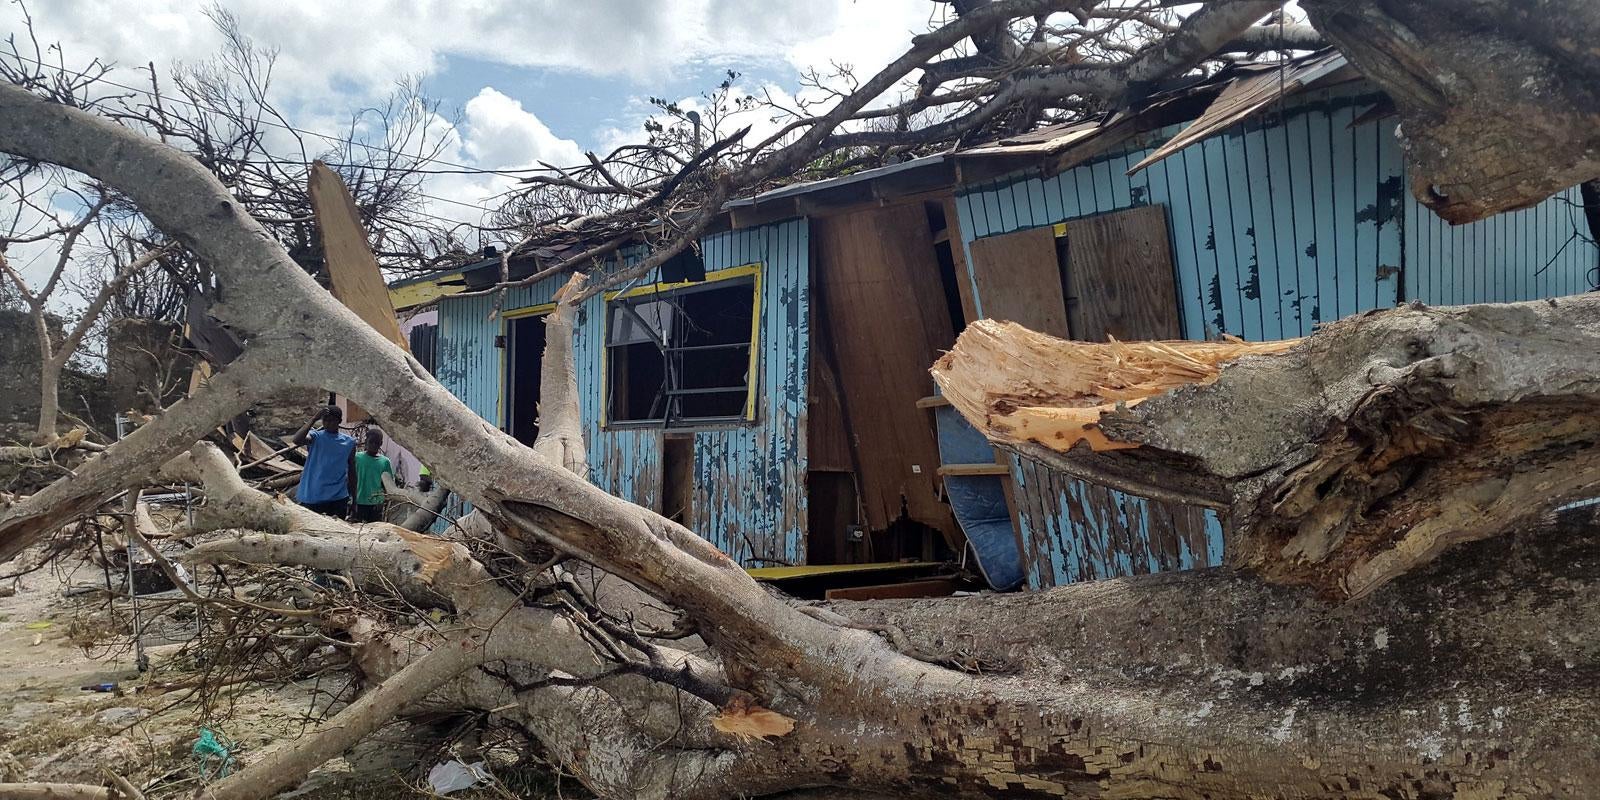 Home destroyed by hurricane in the Caribbean